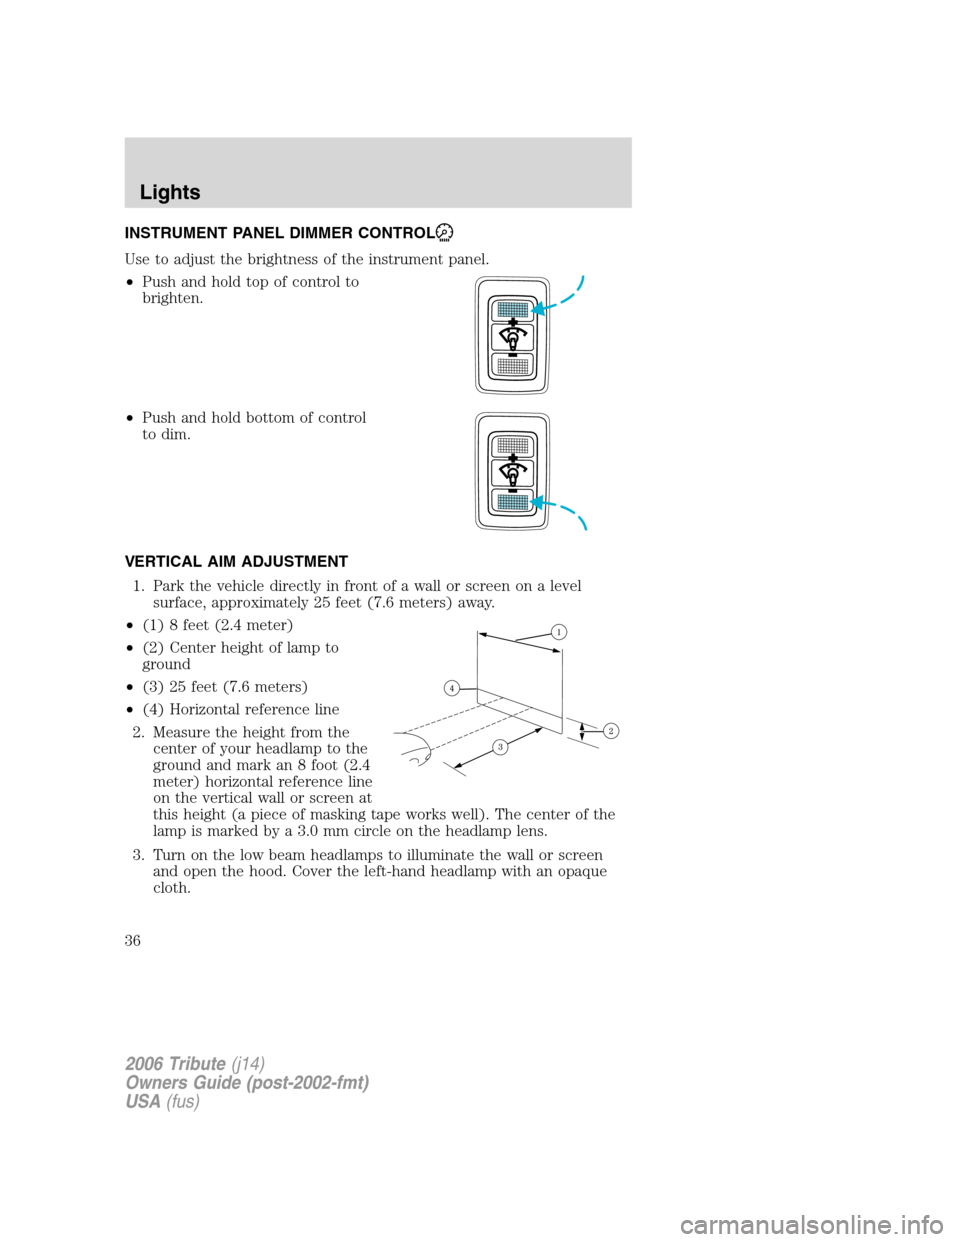 MAZDA MODEL TRIBUTE 2006  Owners Manual (in English) INSTRUMENT PANEL DIMMER CONTROL
Use to adjust the brightness of the instrument panel.
•Push and hold top of control to
brighten.
•Push and hold bottom of control
to dim.
VERTICAL AIM ADJUSTMENT
1.